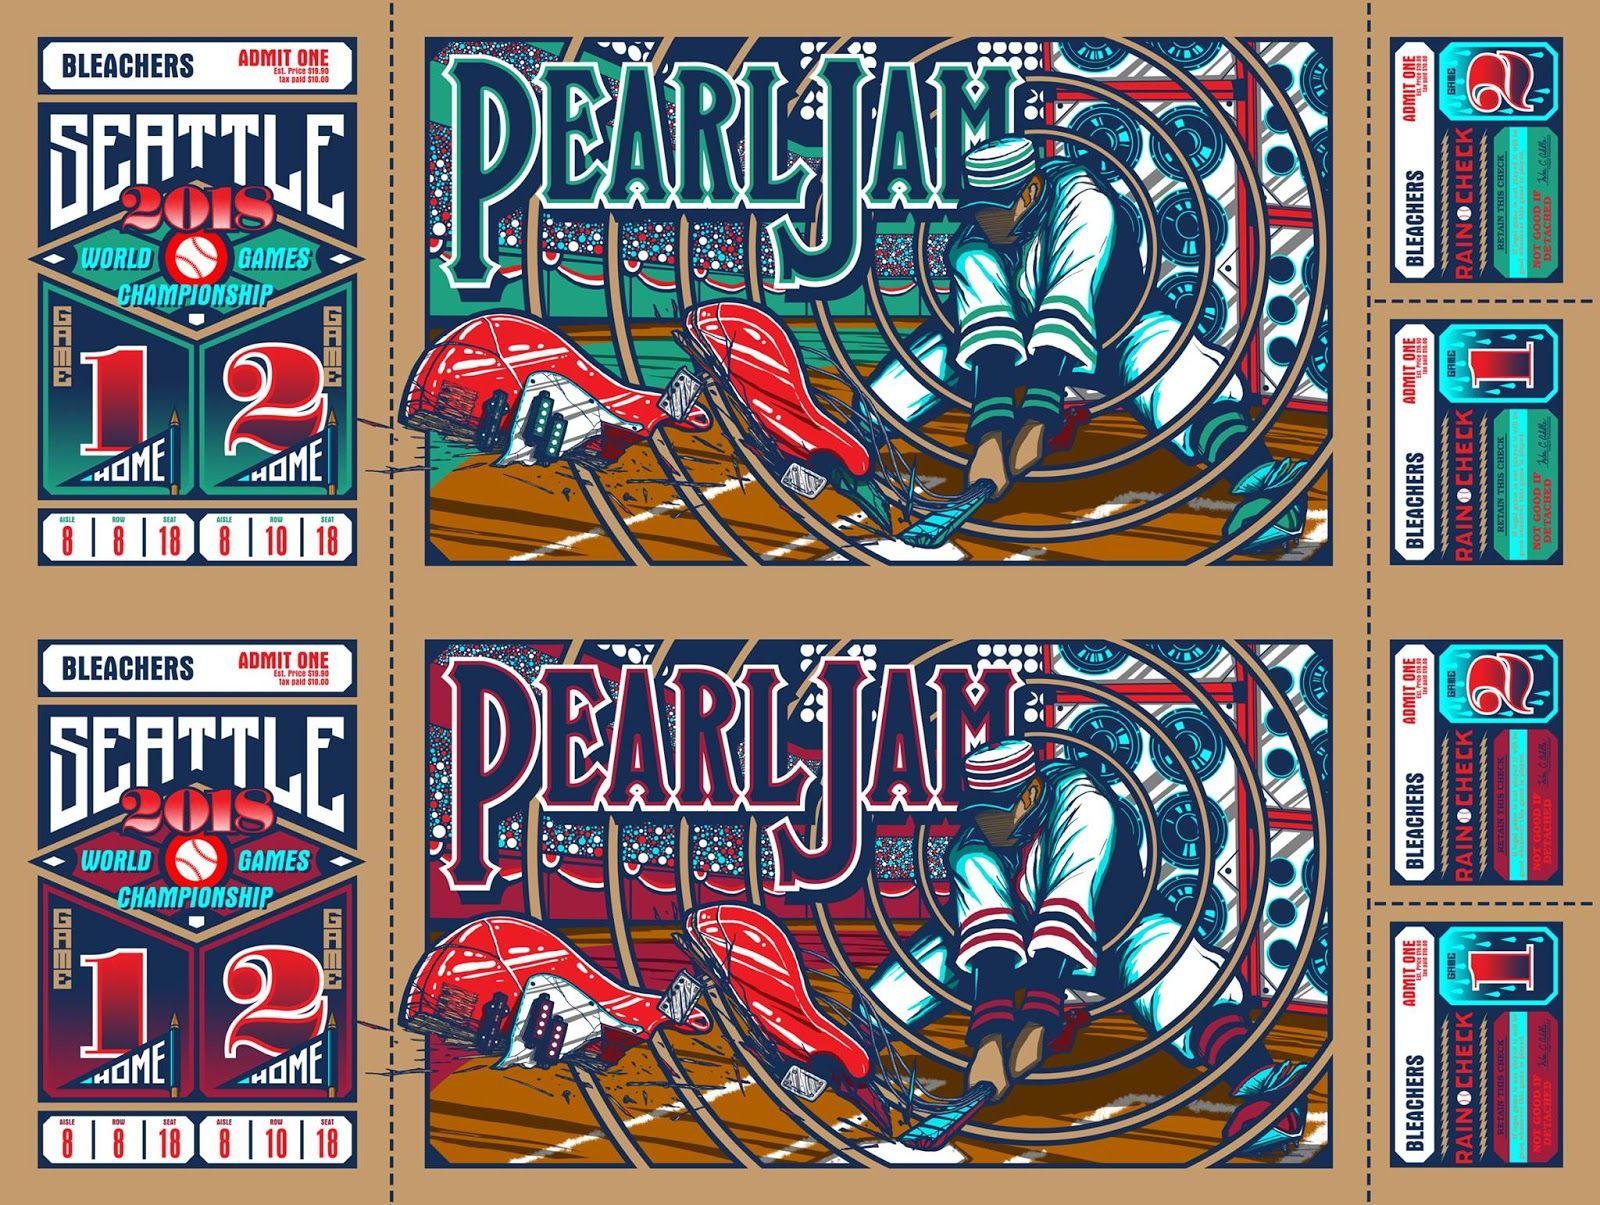 Seattle Pearl Jam Logo - INSIDE THE ROCK POSTER FRAME BLOG: Pearl Jam Seattle The Home Shows ...